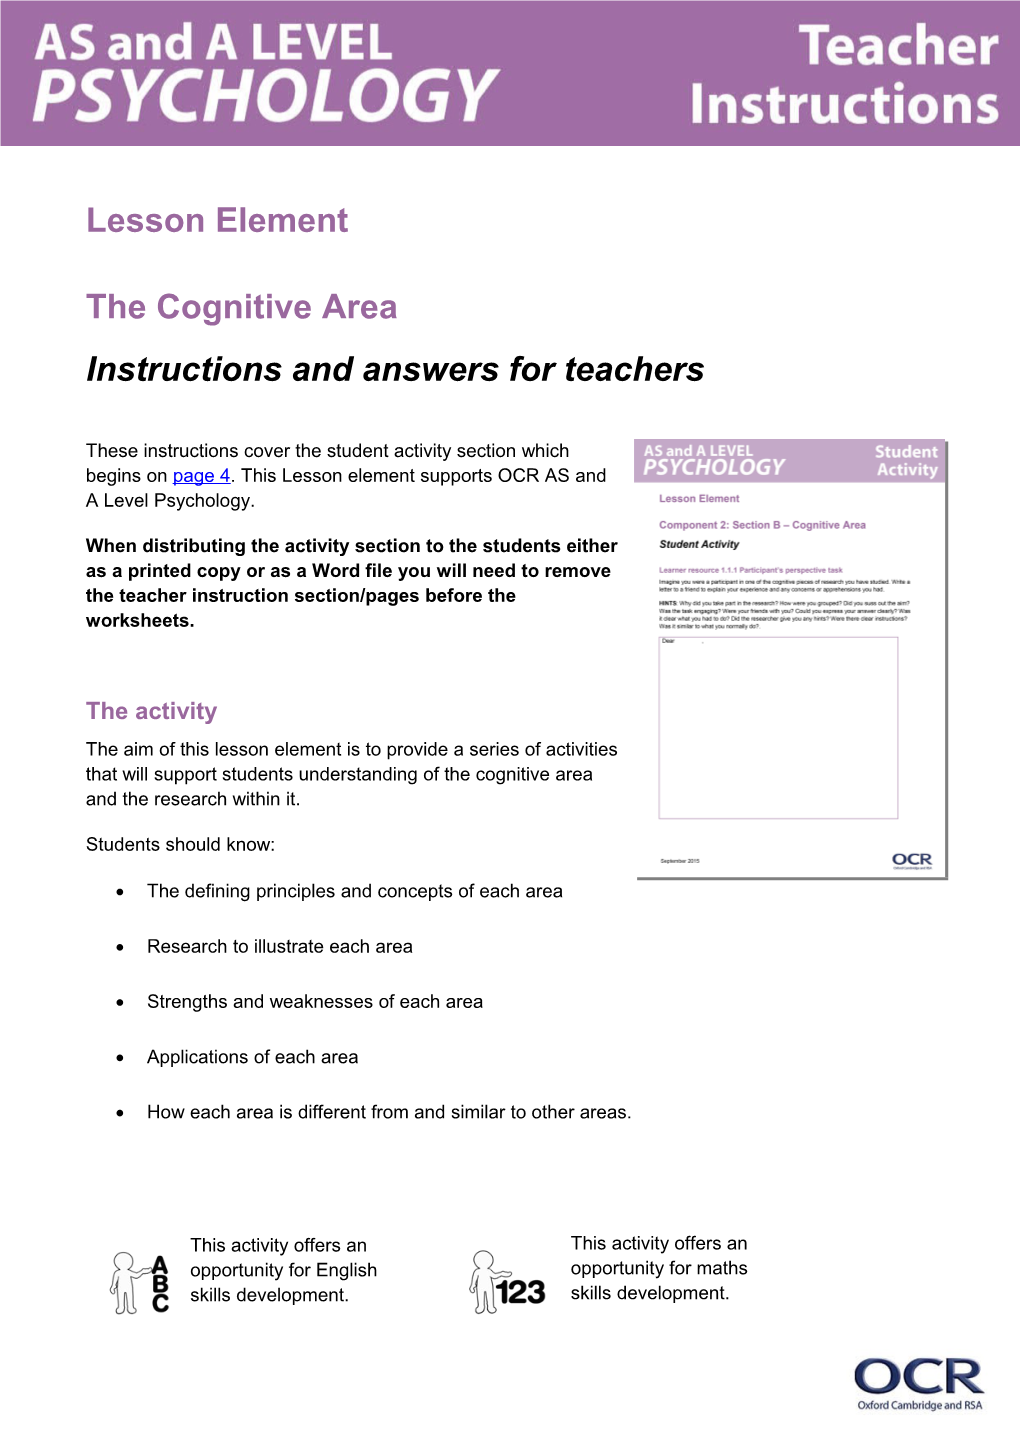 AS and a Level Psychology Lesson Element (The Cognitive Area)